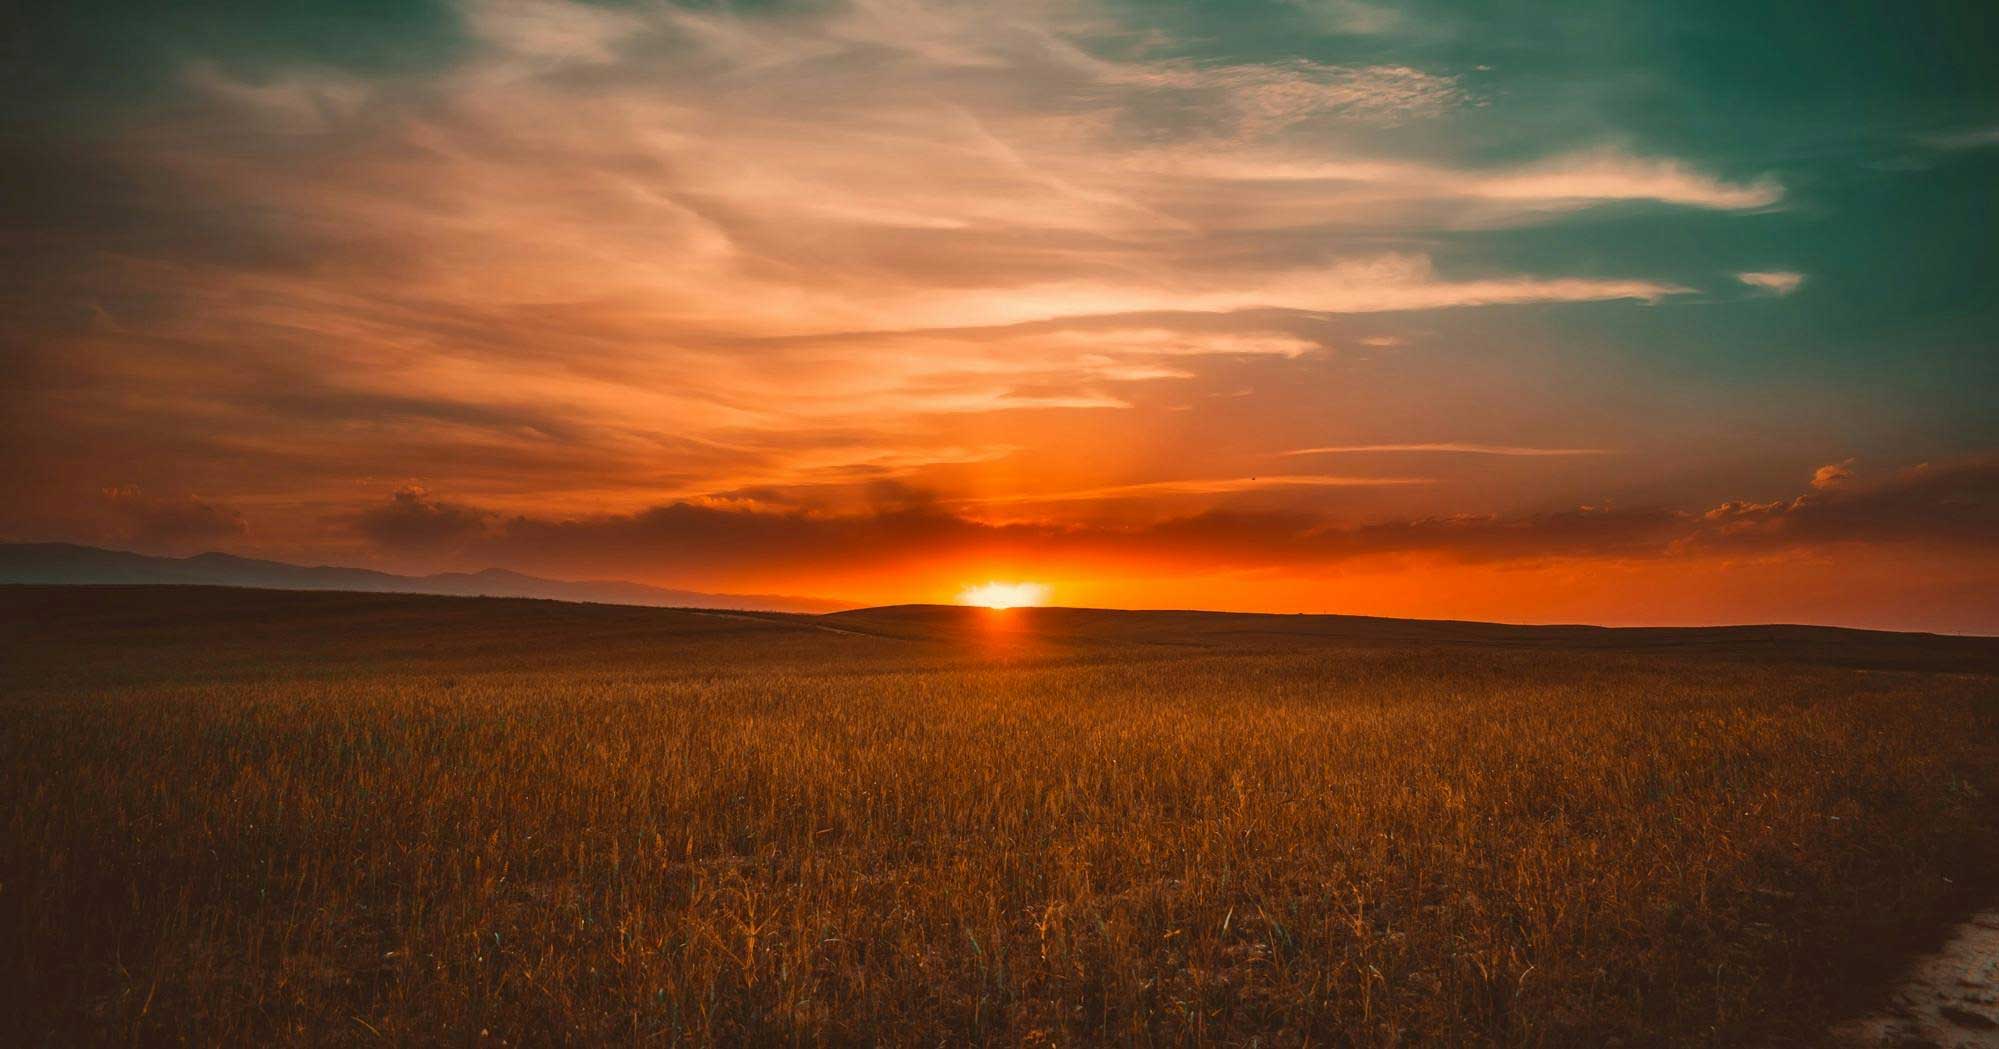 Sunset over wheat field with mountains